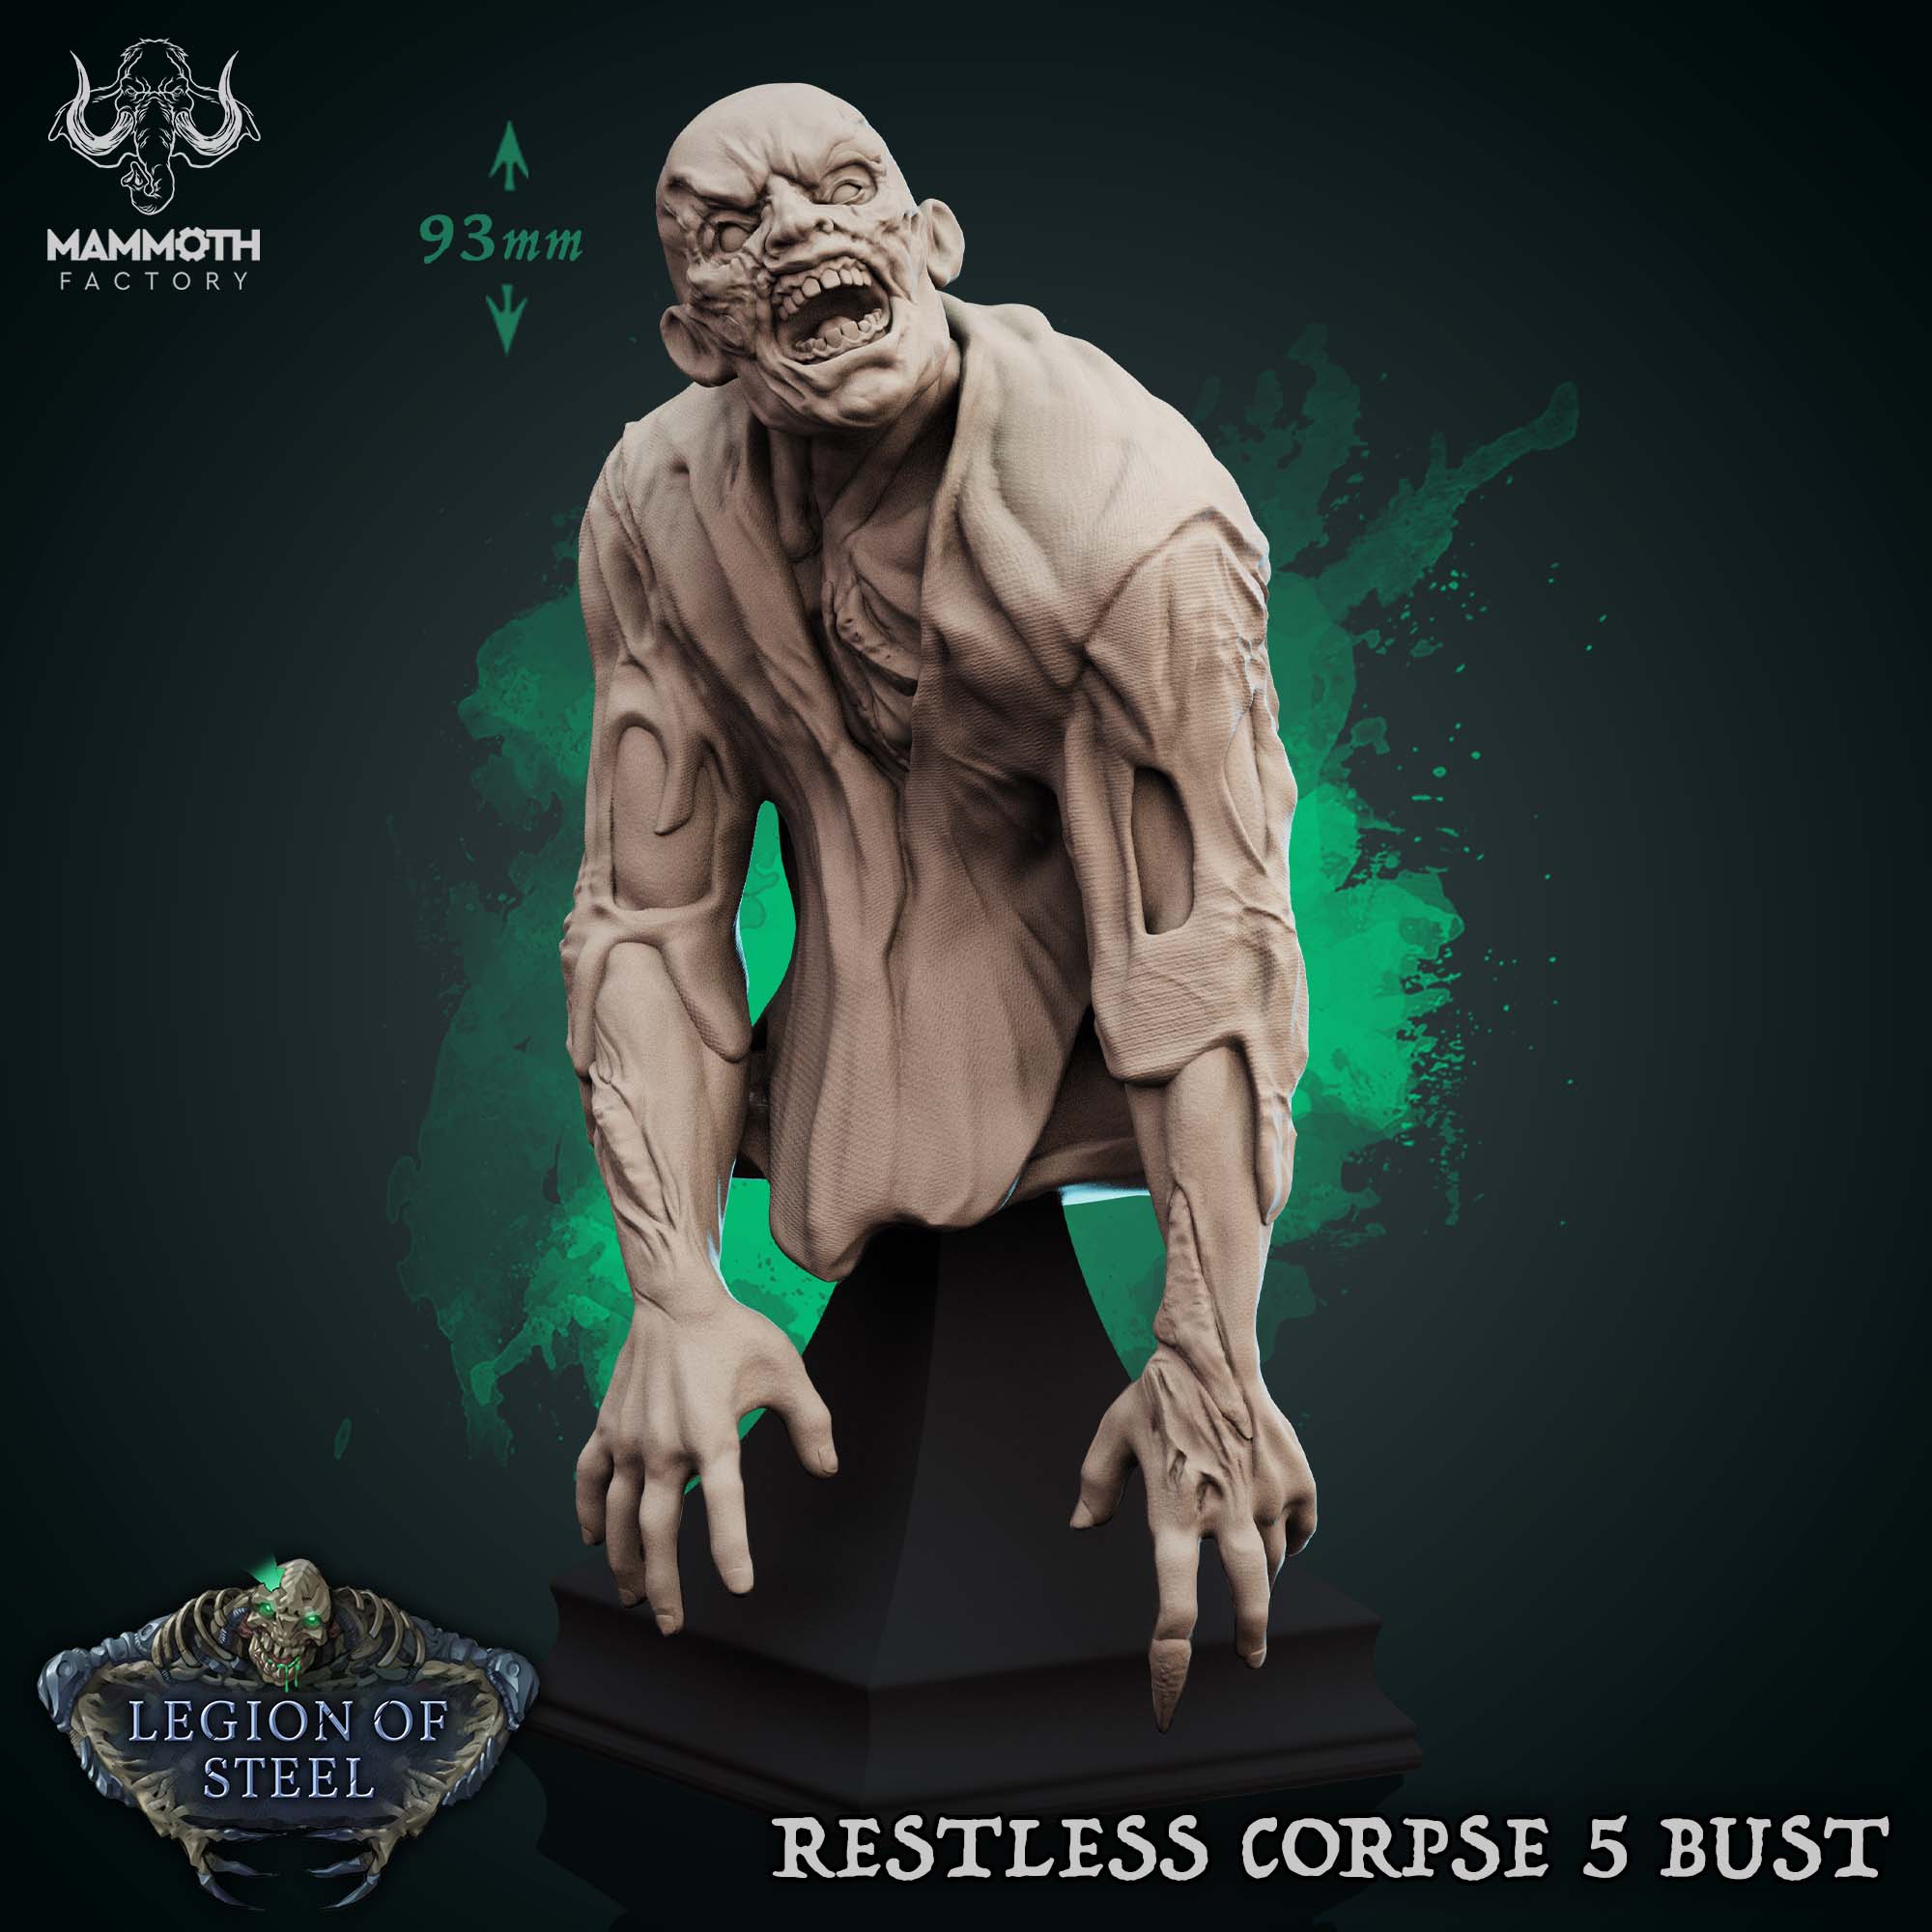 Restless Corpse Bust